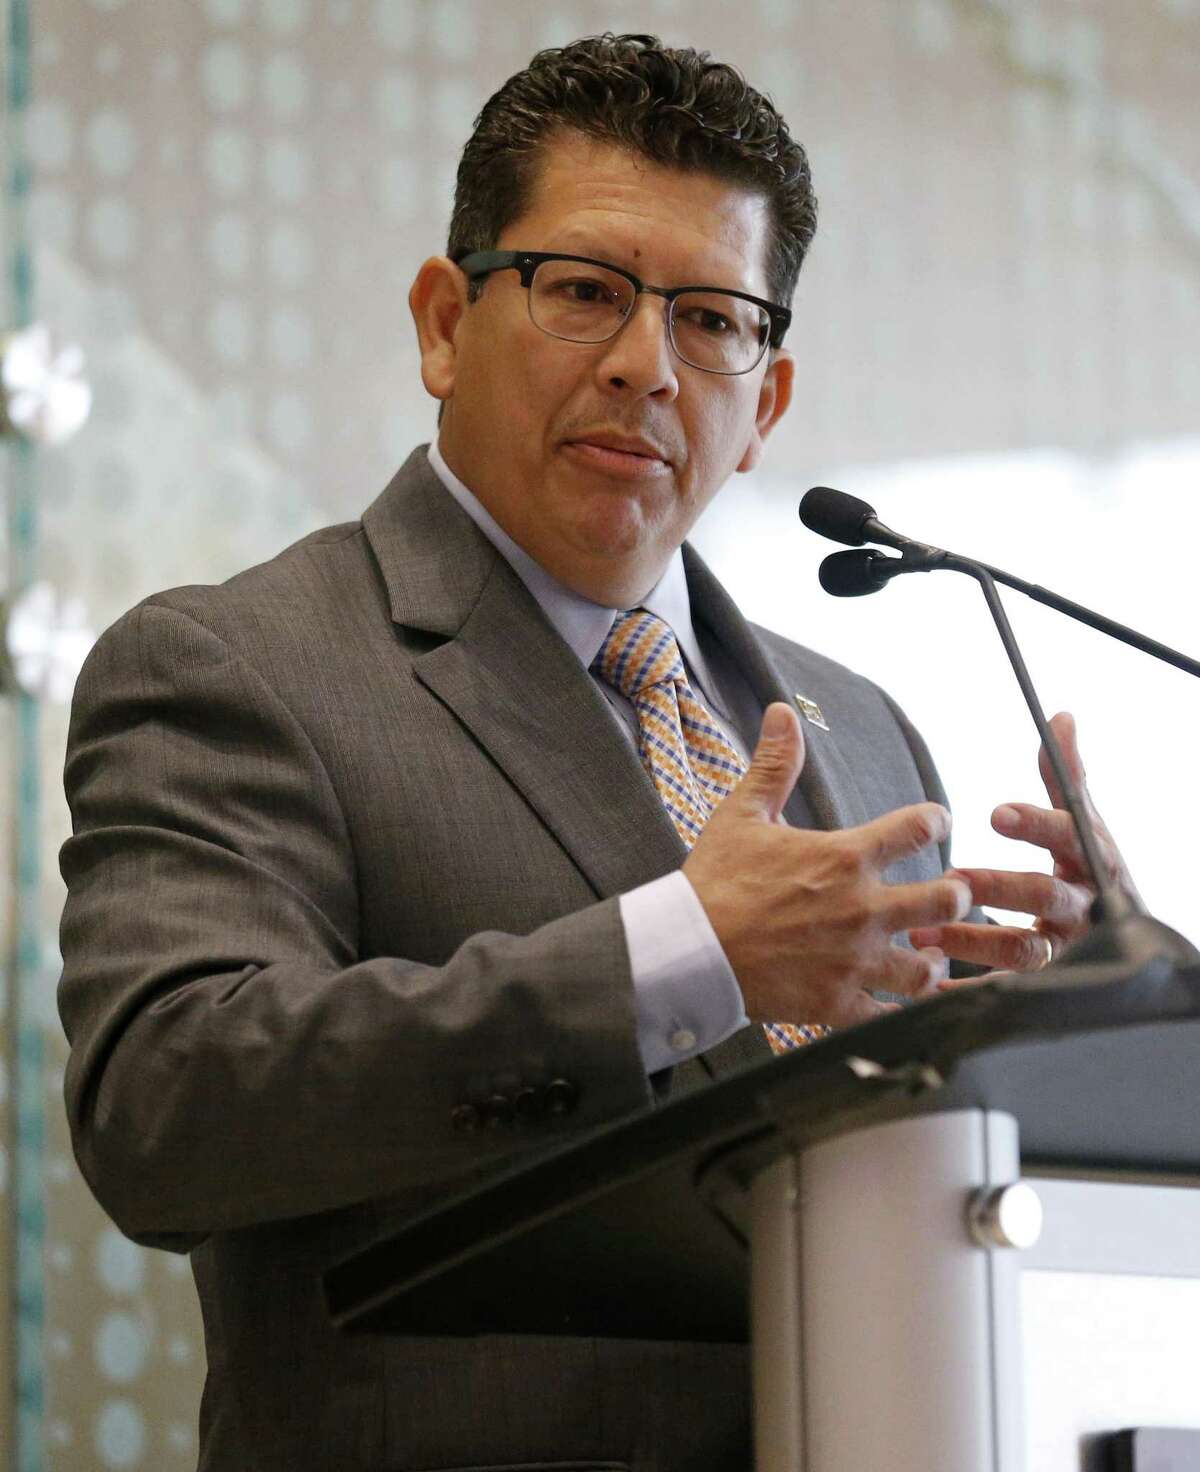 Richard Perez, President and CEO of the San Antonio Chamber of Commerce, was in Montreal Monday for a meeting of U.S., Mexican and Canadian chambers in support of the North American Free Trade Agreement.